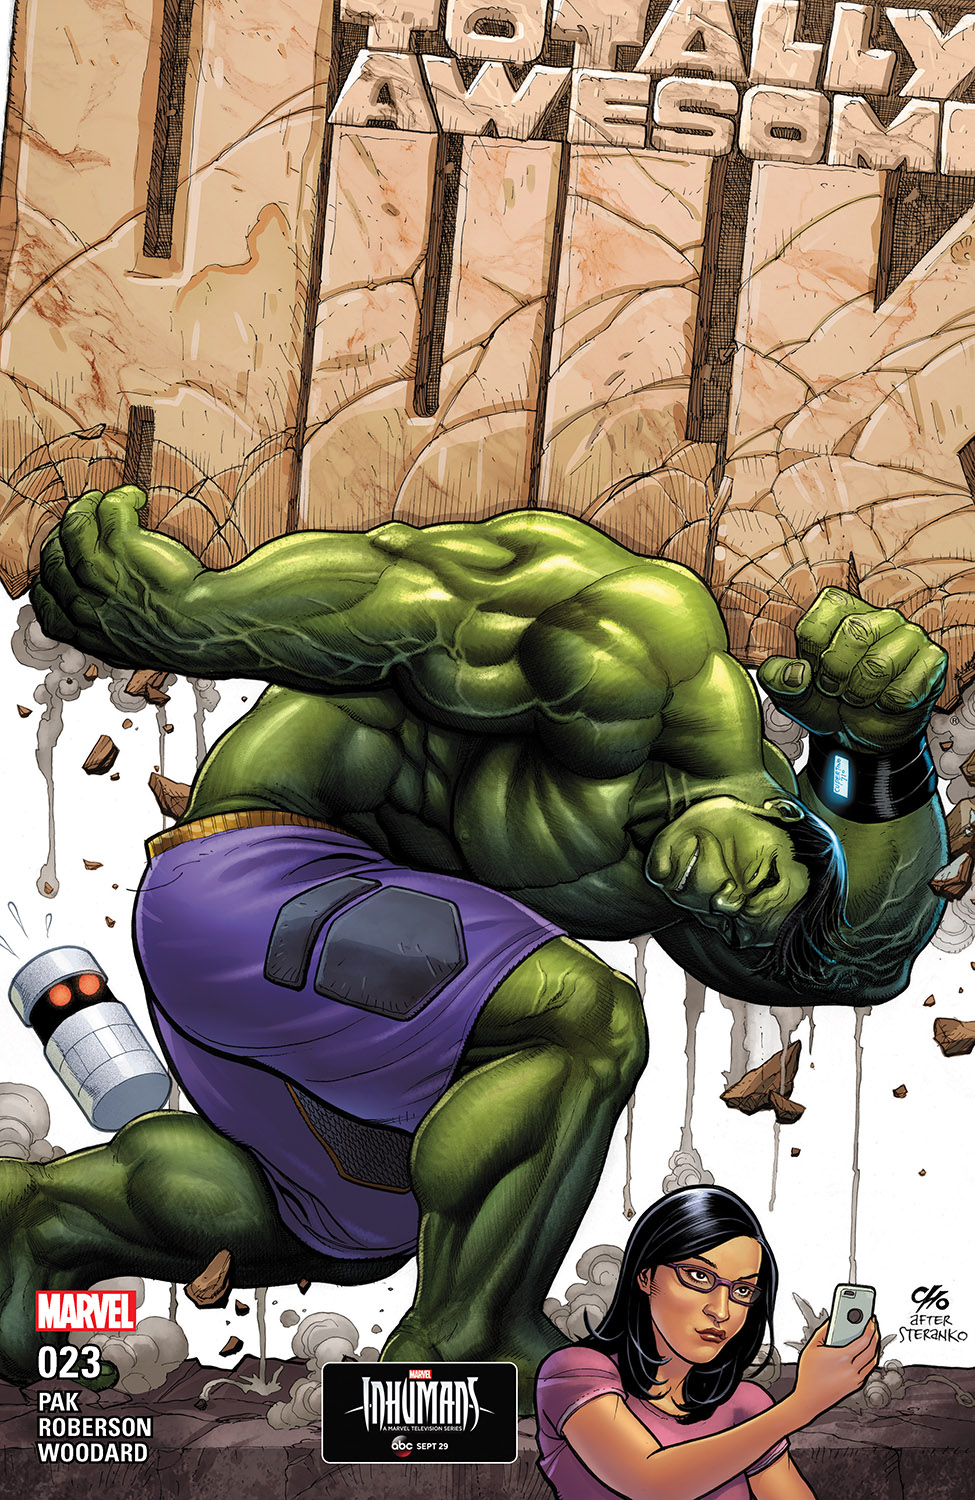 The Totally Awesome Hulk (2015) #23